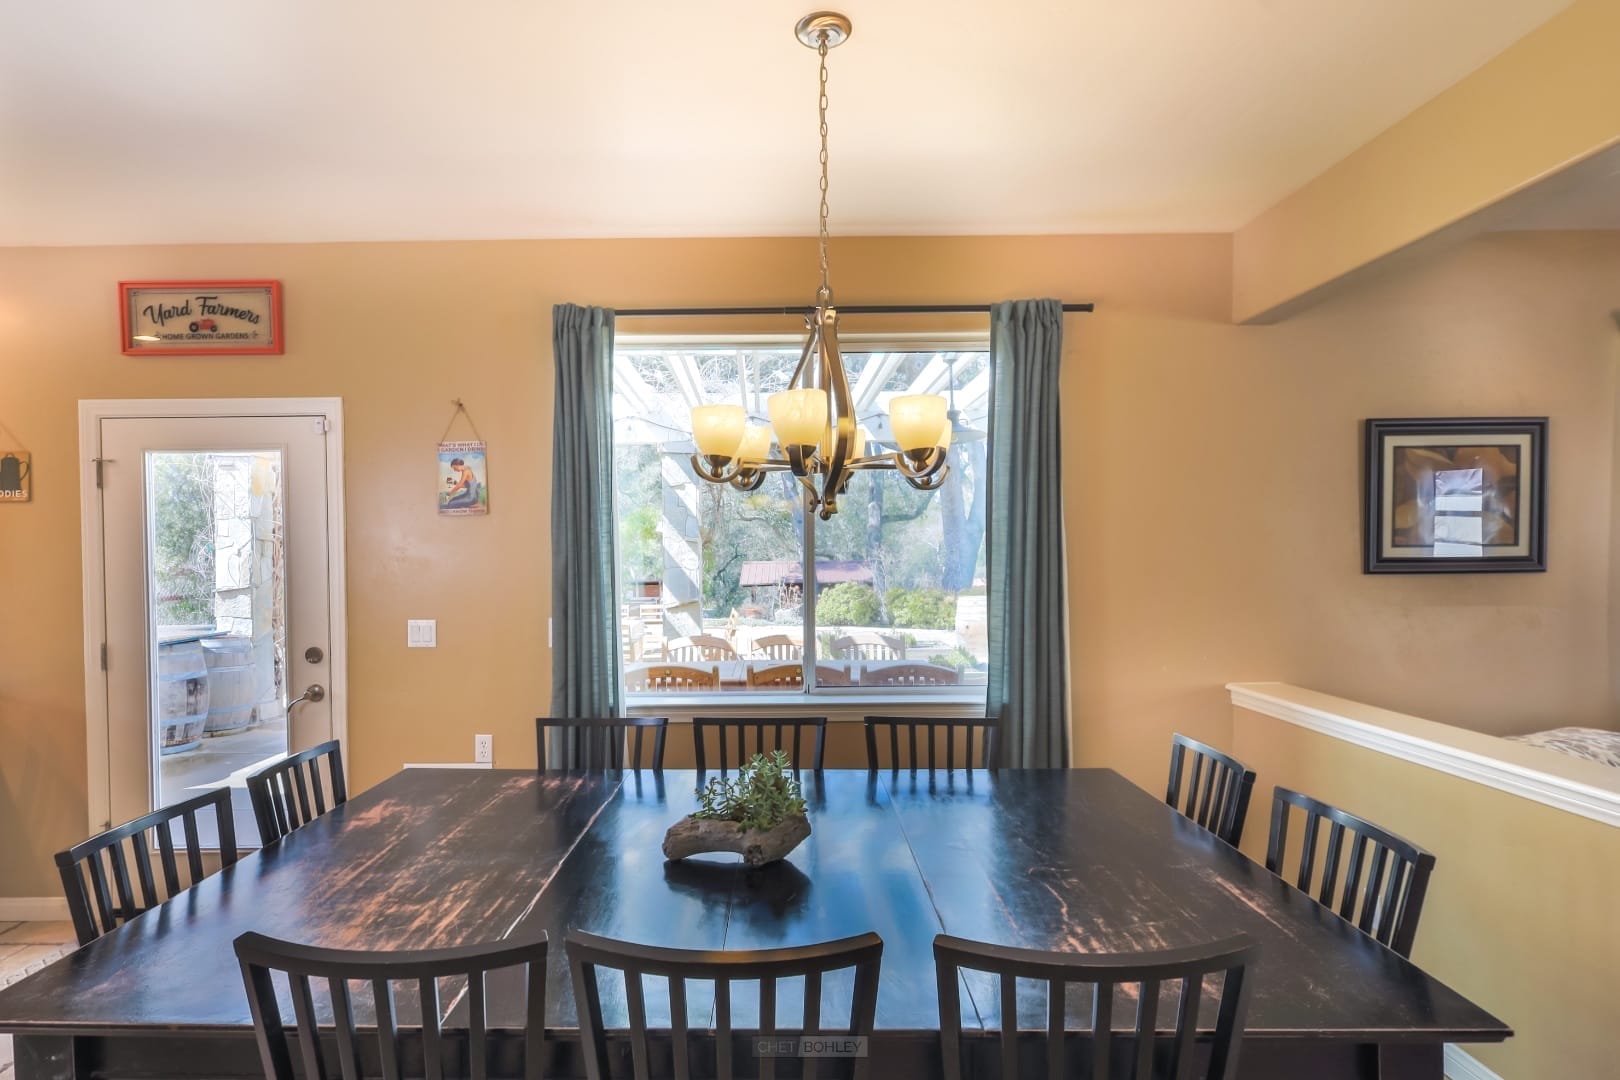 A dining room with a large table and chairs, perfect for gatherings in Paso Robles.